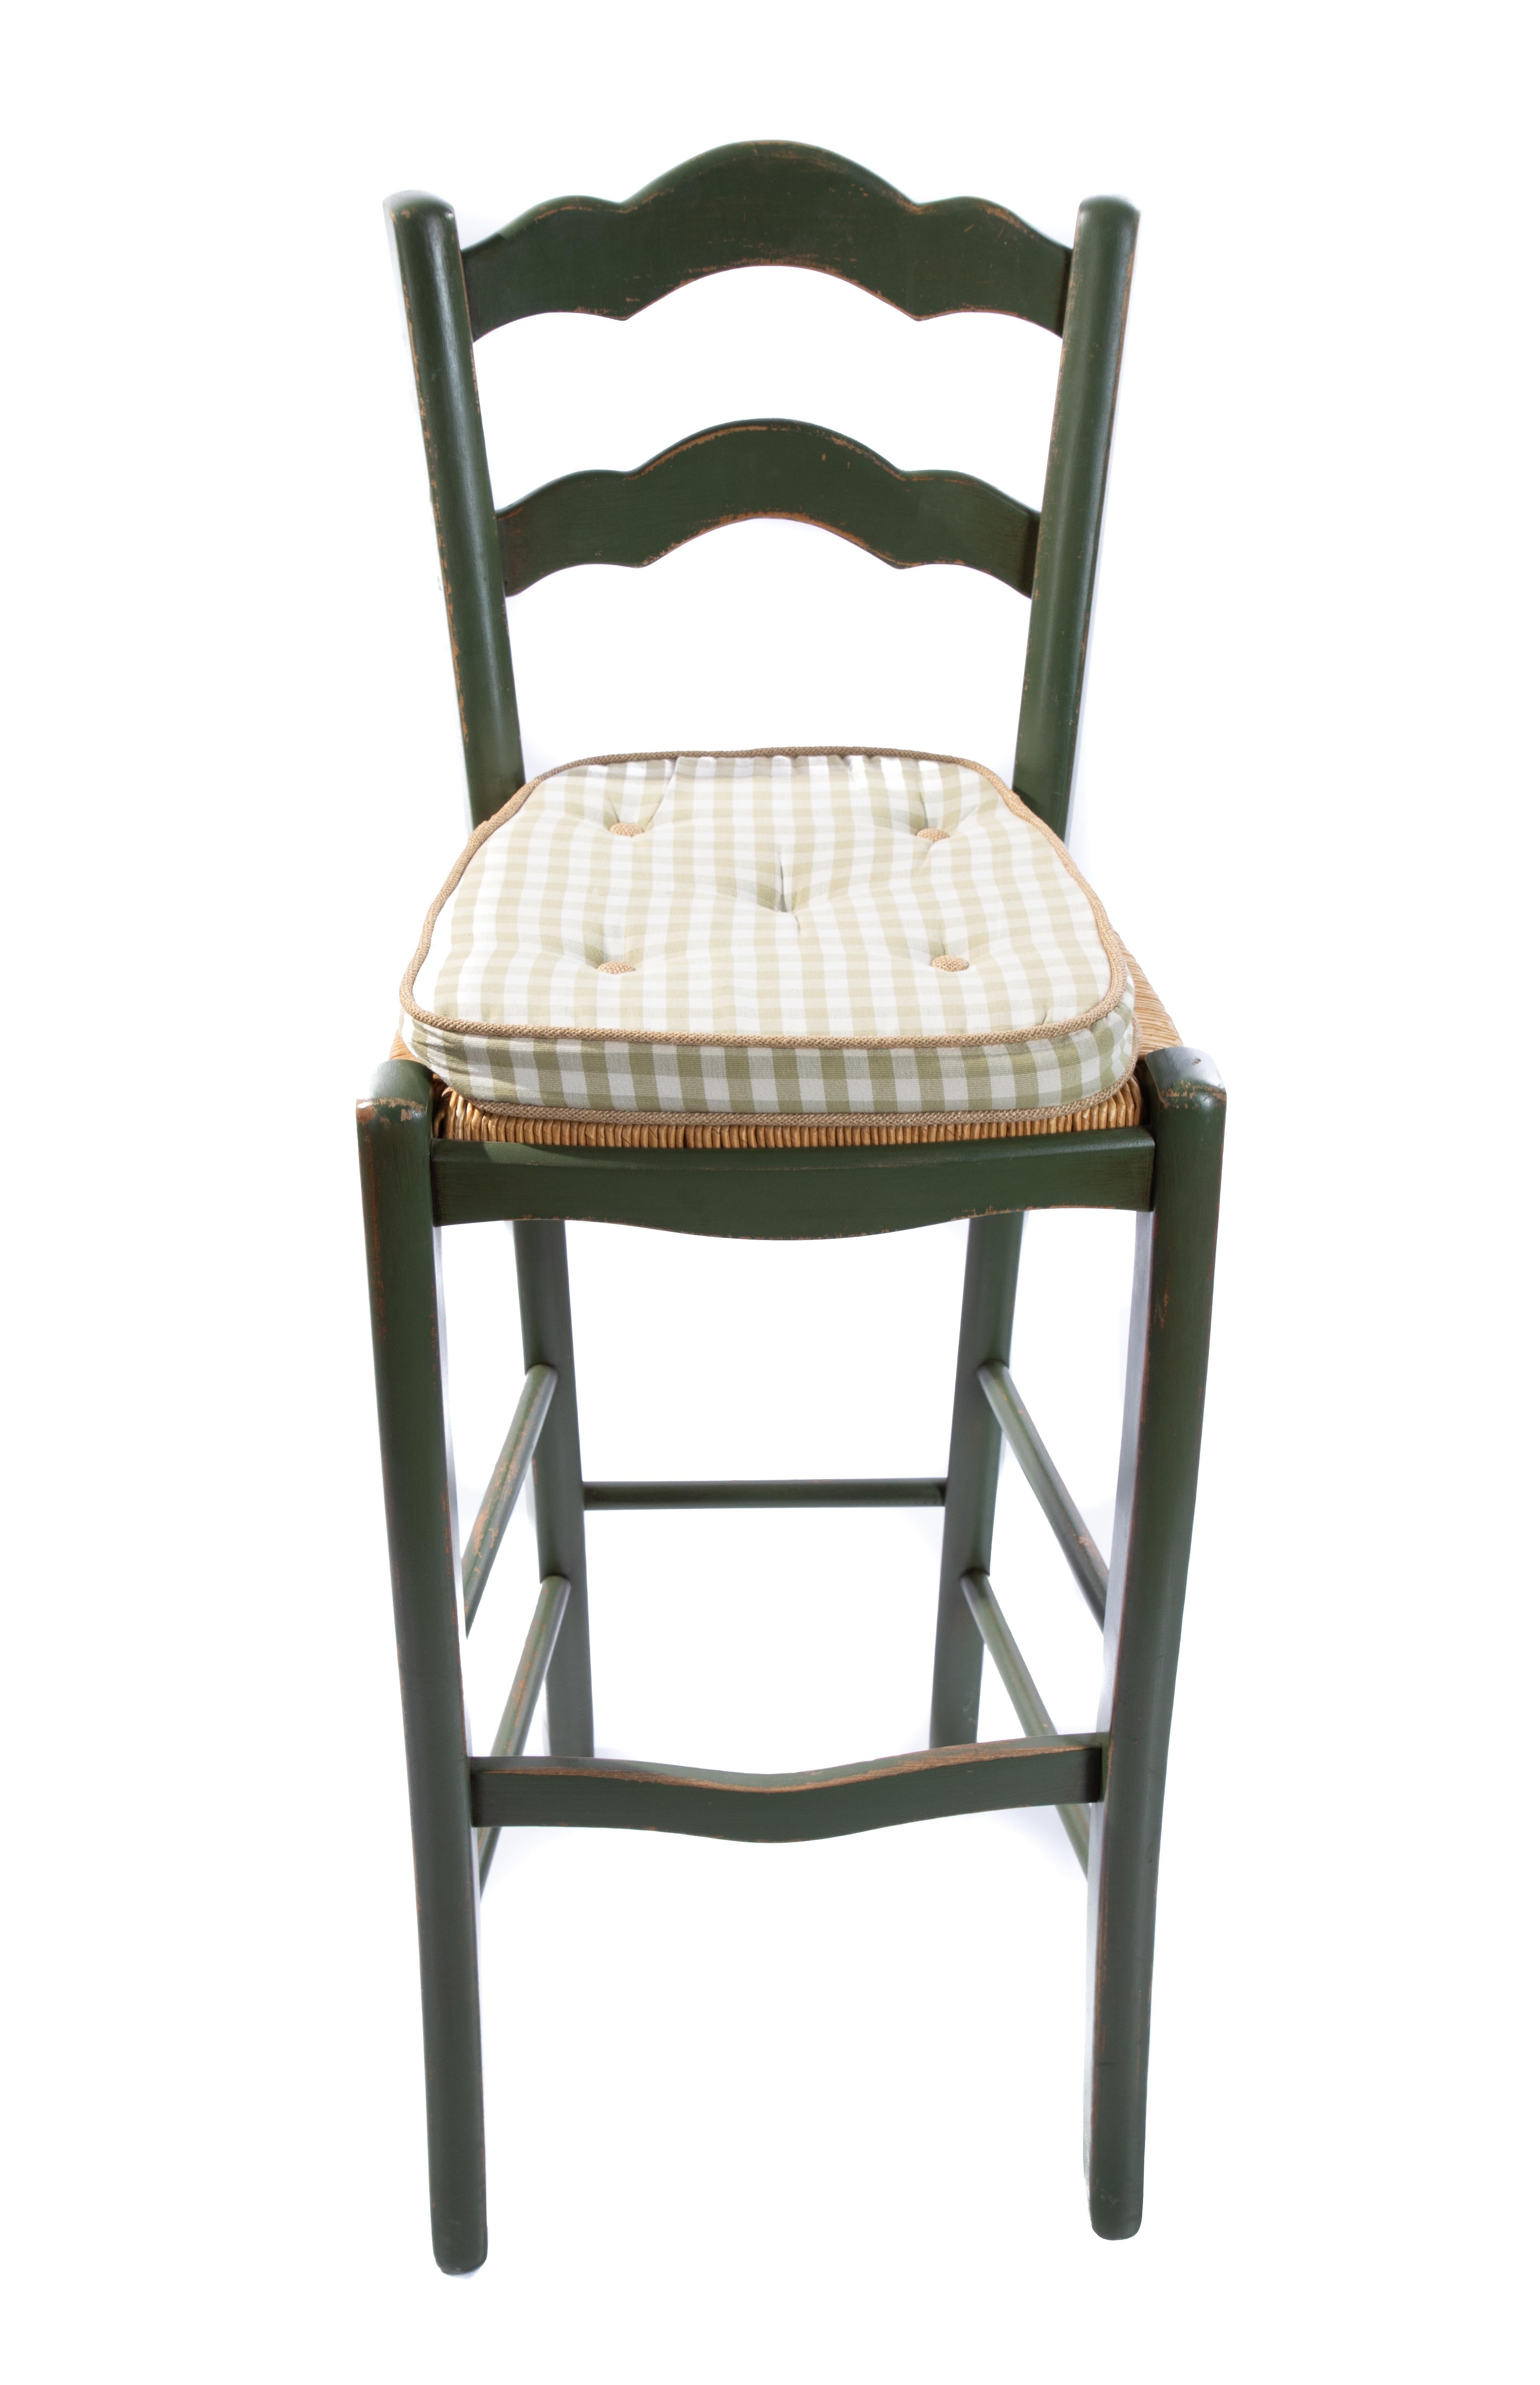 Woodwork Italian Barstools with Plaid Seat Cushions For Sale